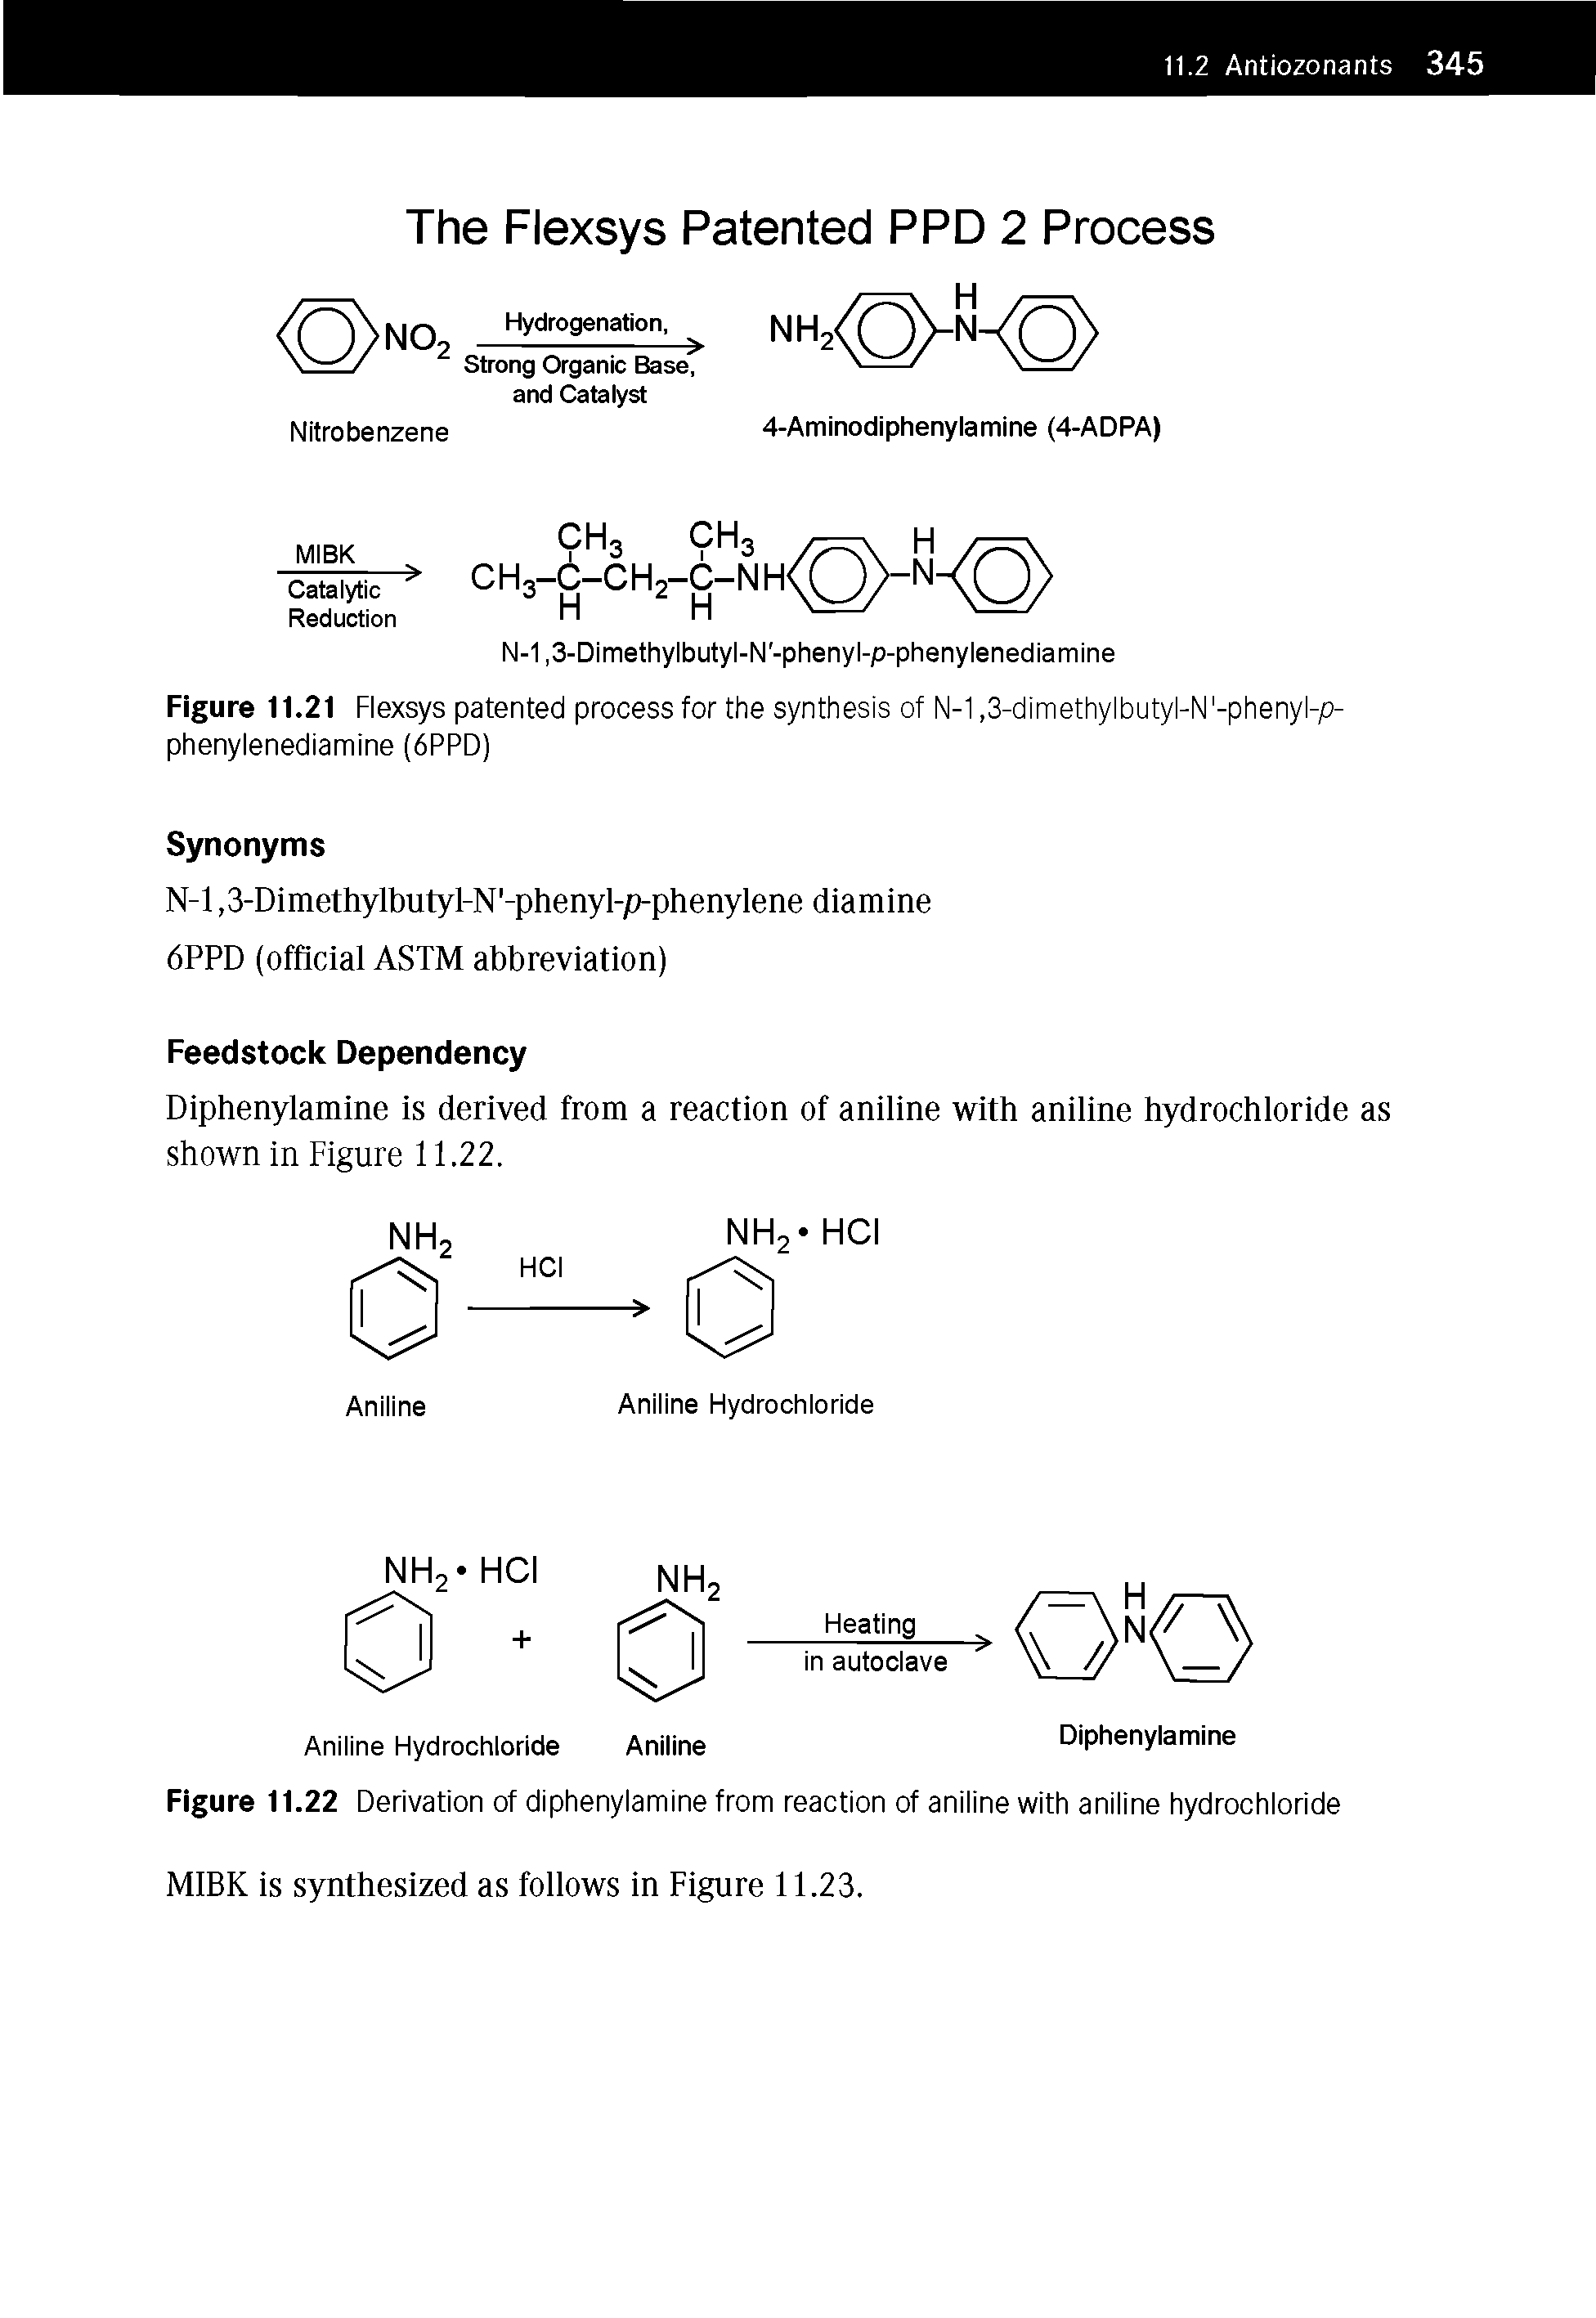 Figure 11.21 Flexsys patented process for the synthesis of N-1,3-dimethylbutyl-N -phenyl-p-phenylenediamine (6PPD)...